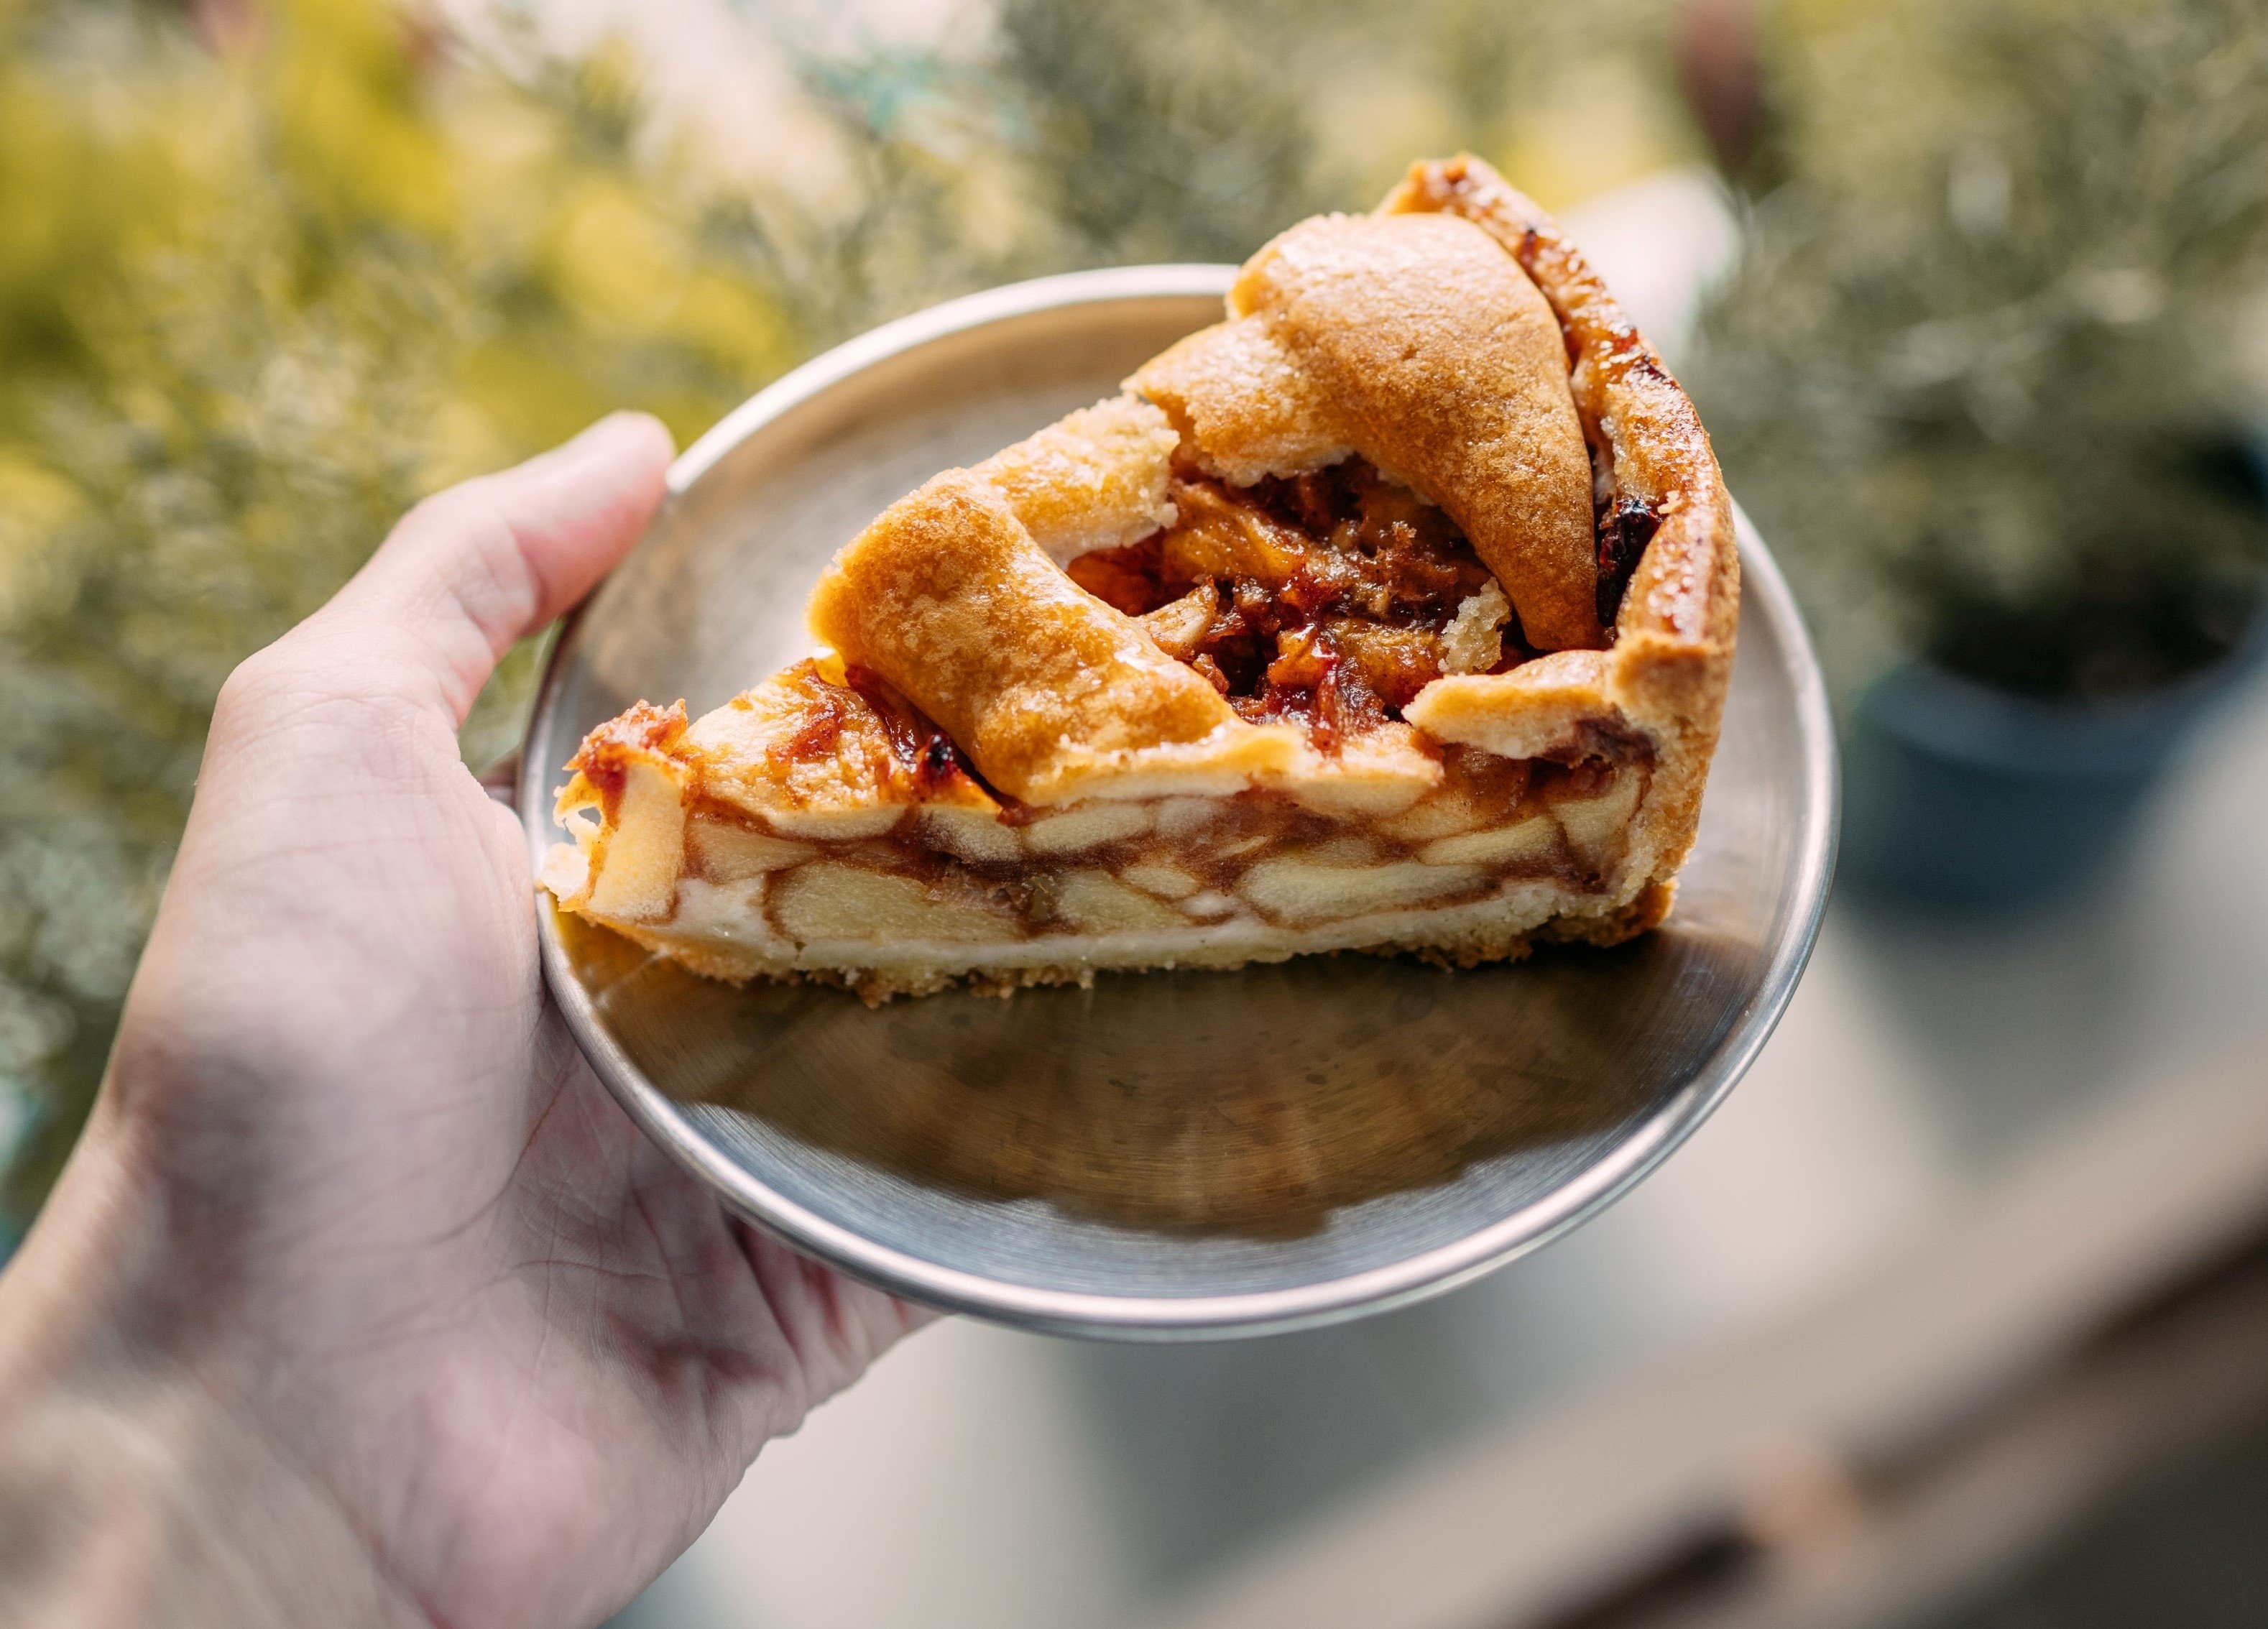 Whenever Dave had a slice of apple pie Karen made, it reminded him of his mother. | Source: Unsplash